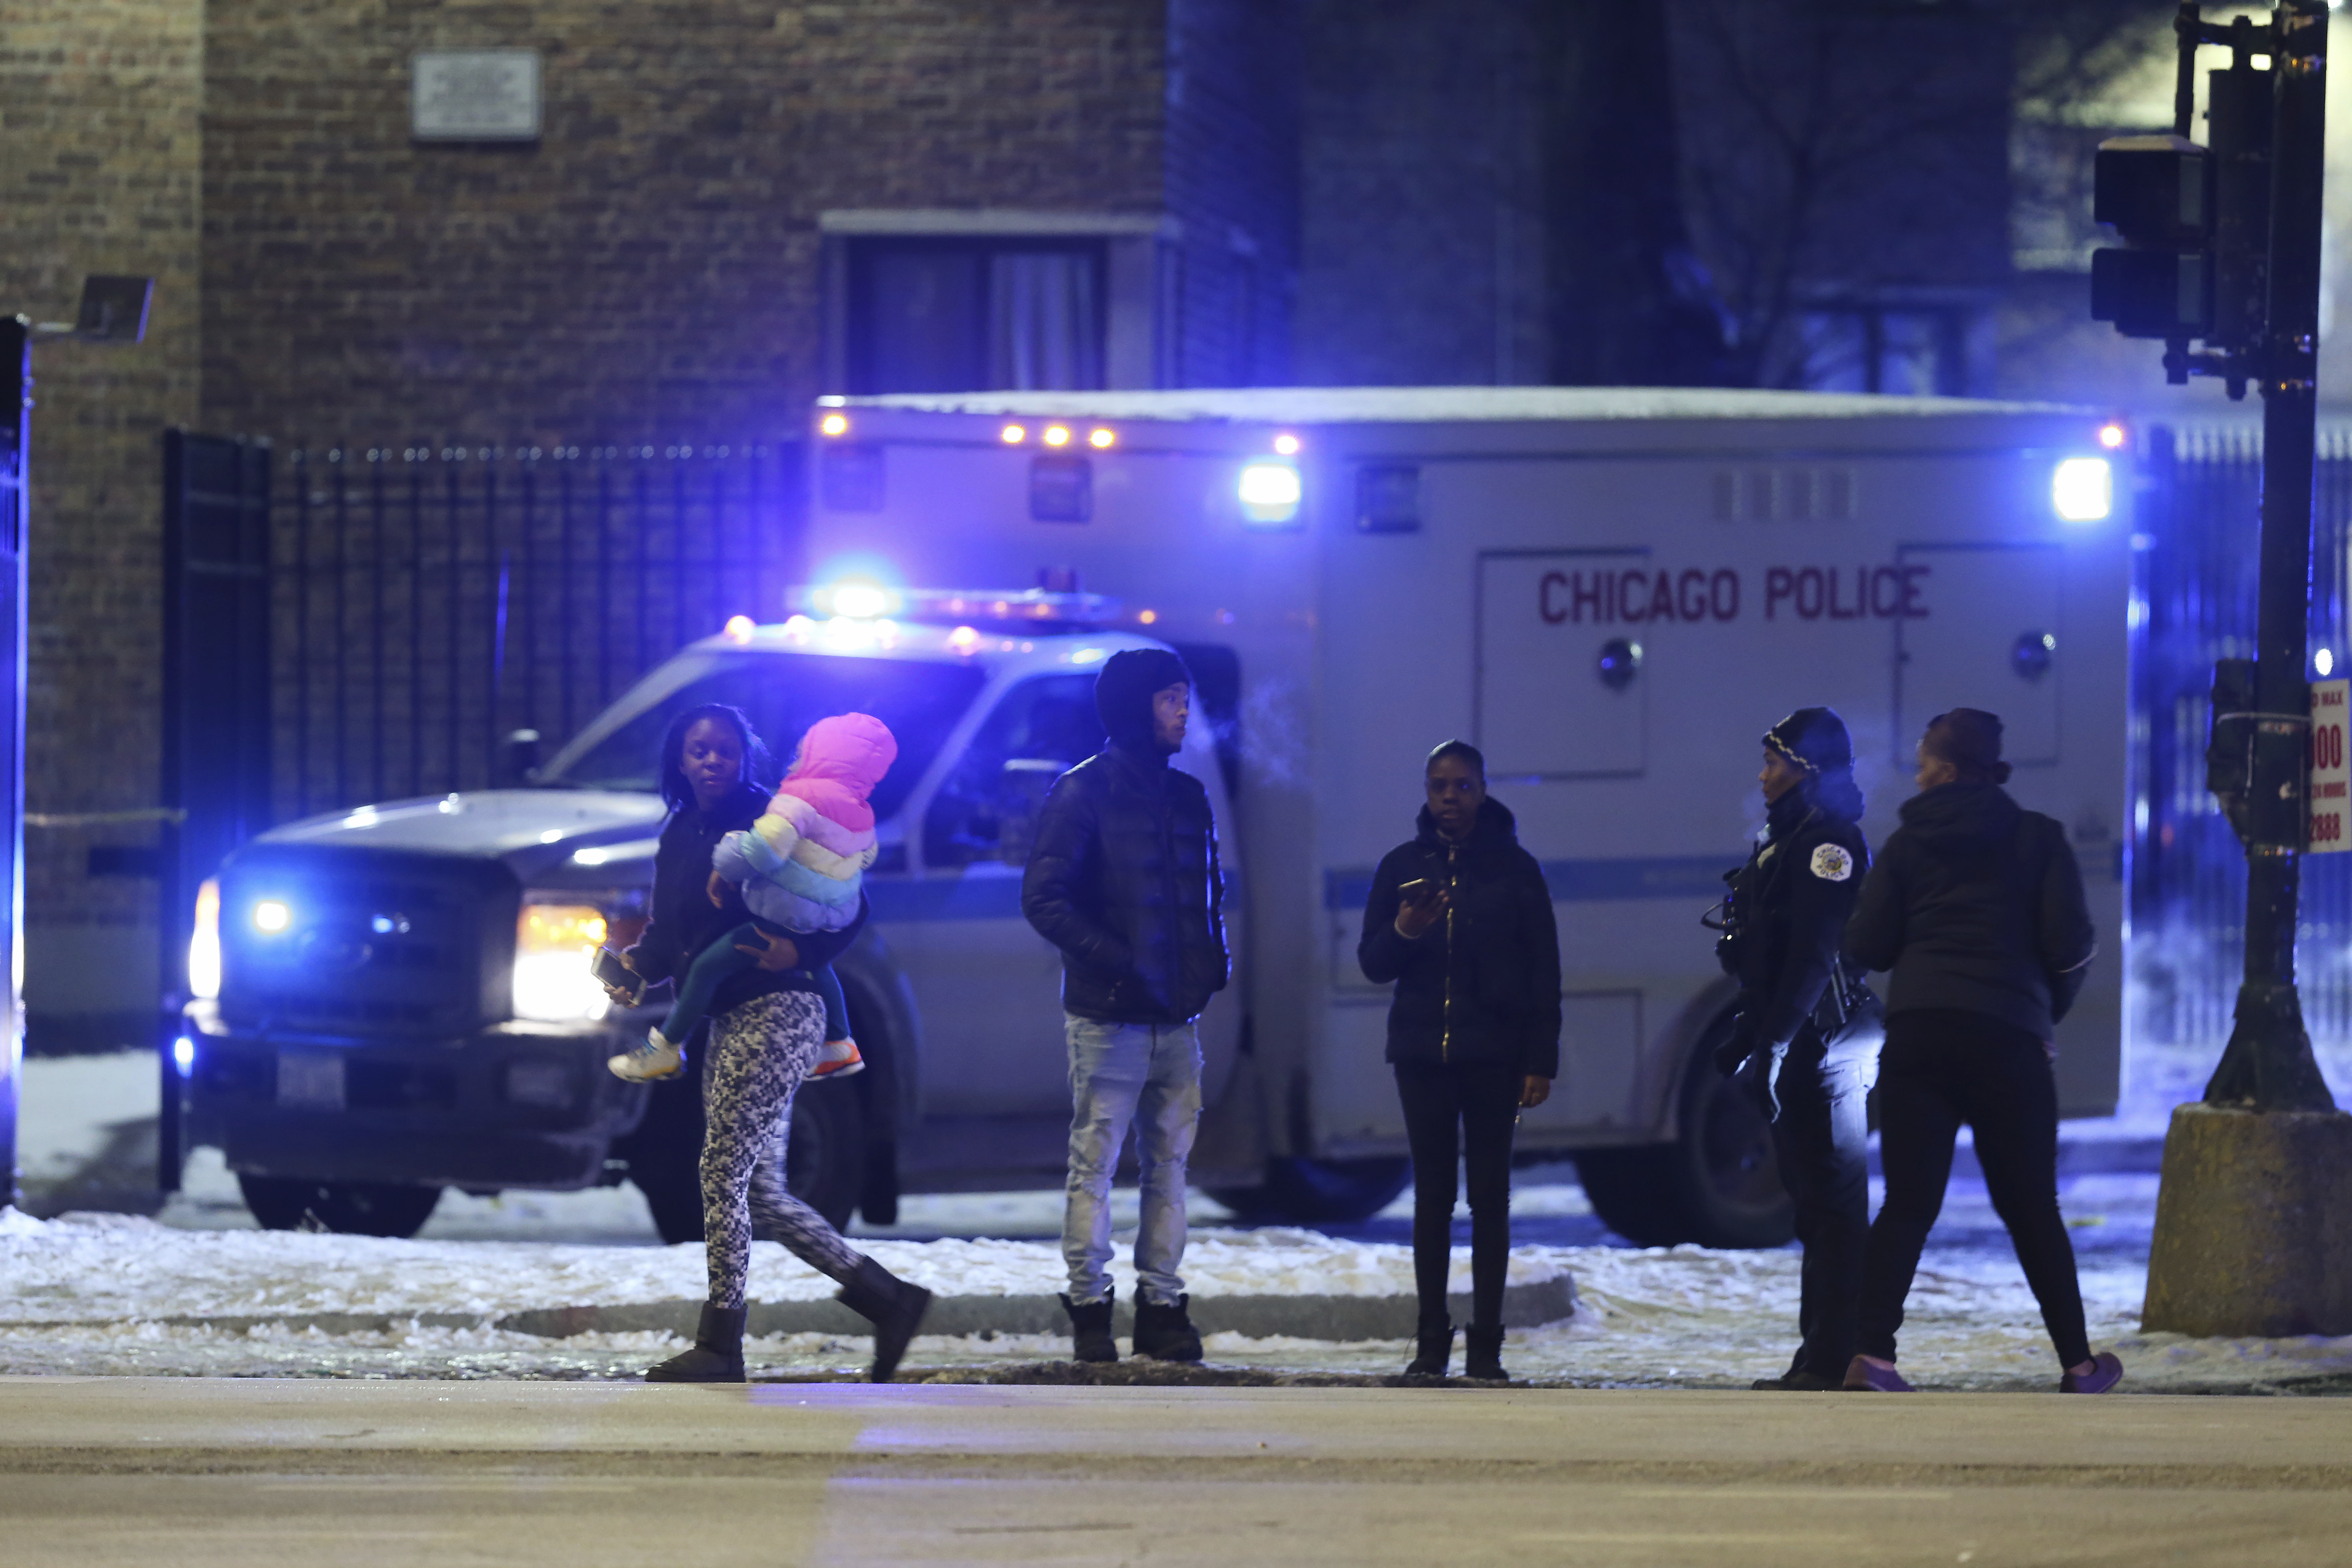 Emergency responders work the scene of a shooting on Feb. 14, 2020 in Chicago. Six people were wounded in the shooting at an apartment complex on Chicago's South Side, police said. (John J. Kim—AP/Chicago Tribune)